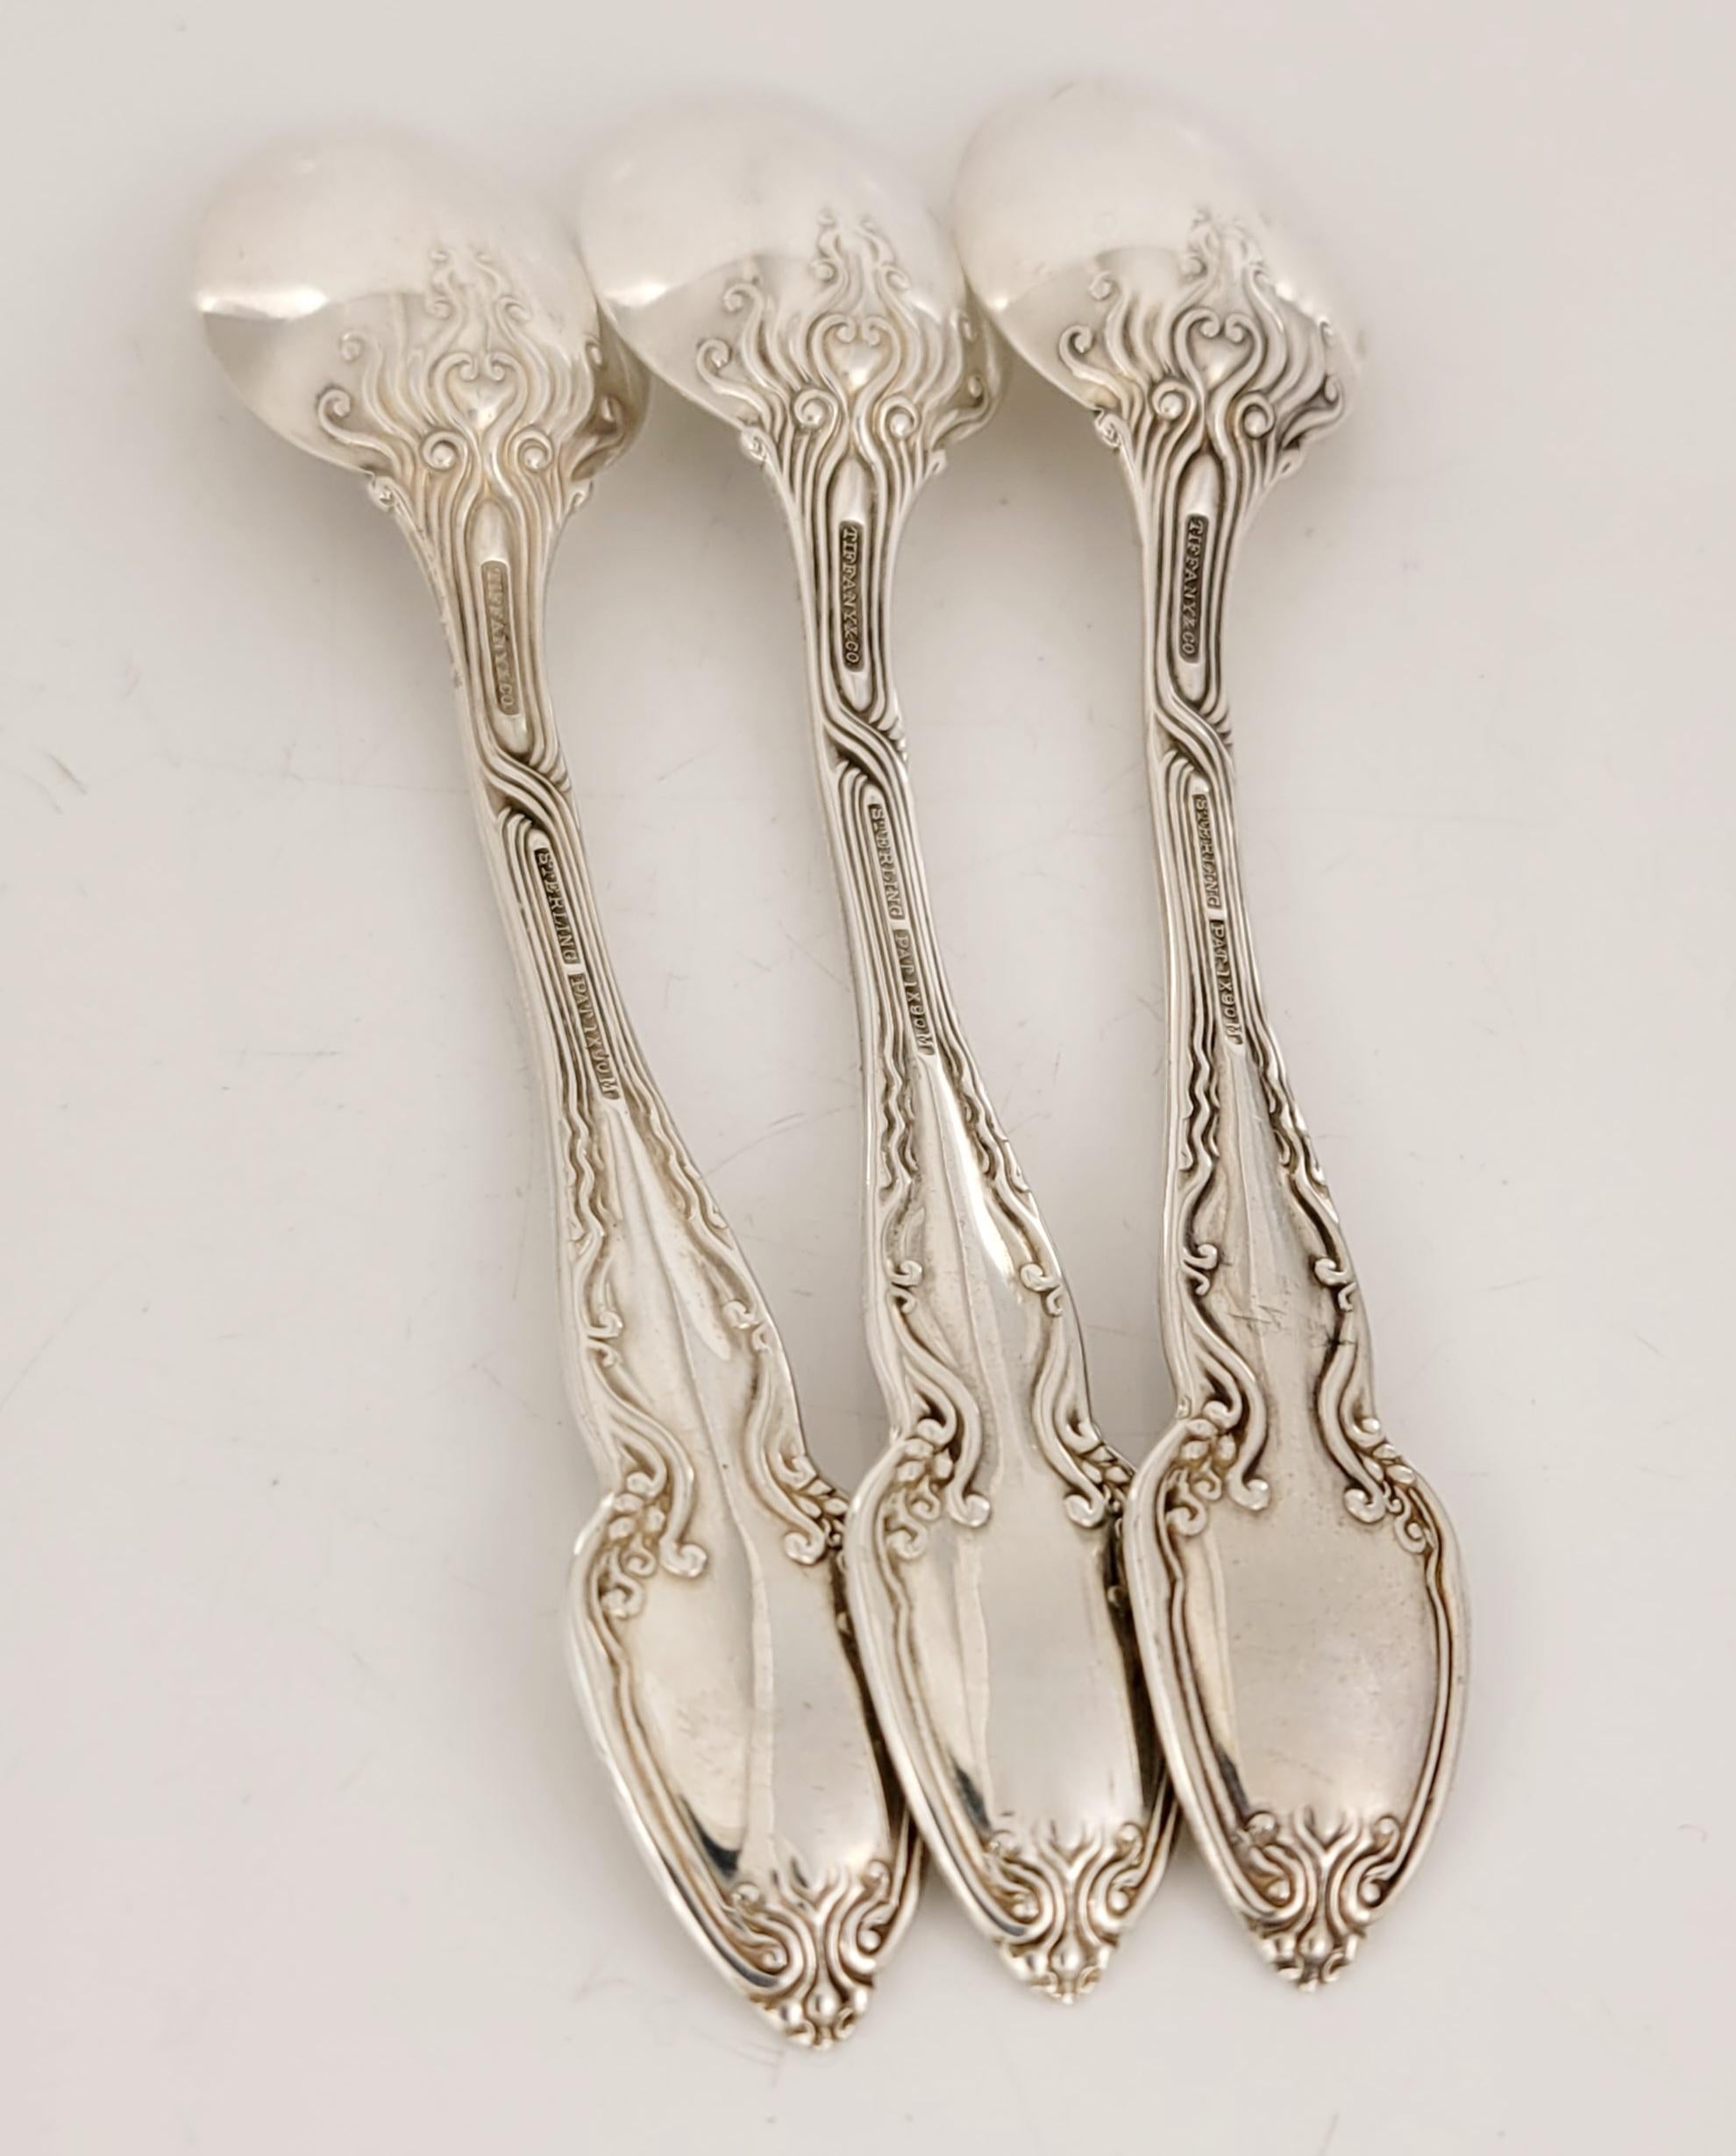 Brand Tiffany& co Spoons
Material Sterling Silver 925
Spoon Dimension 4''
Weight: 13gr each
Condition Pre-Owned
Comes with Tiffany& co pouch